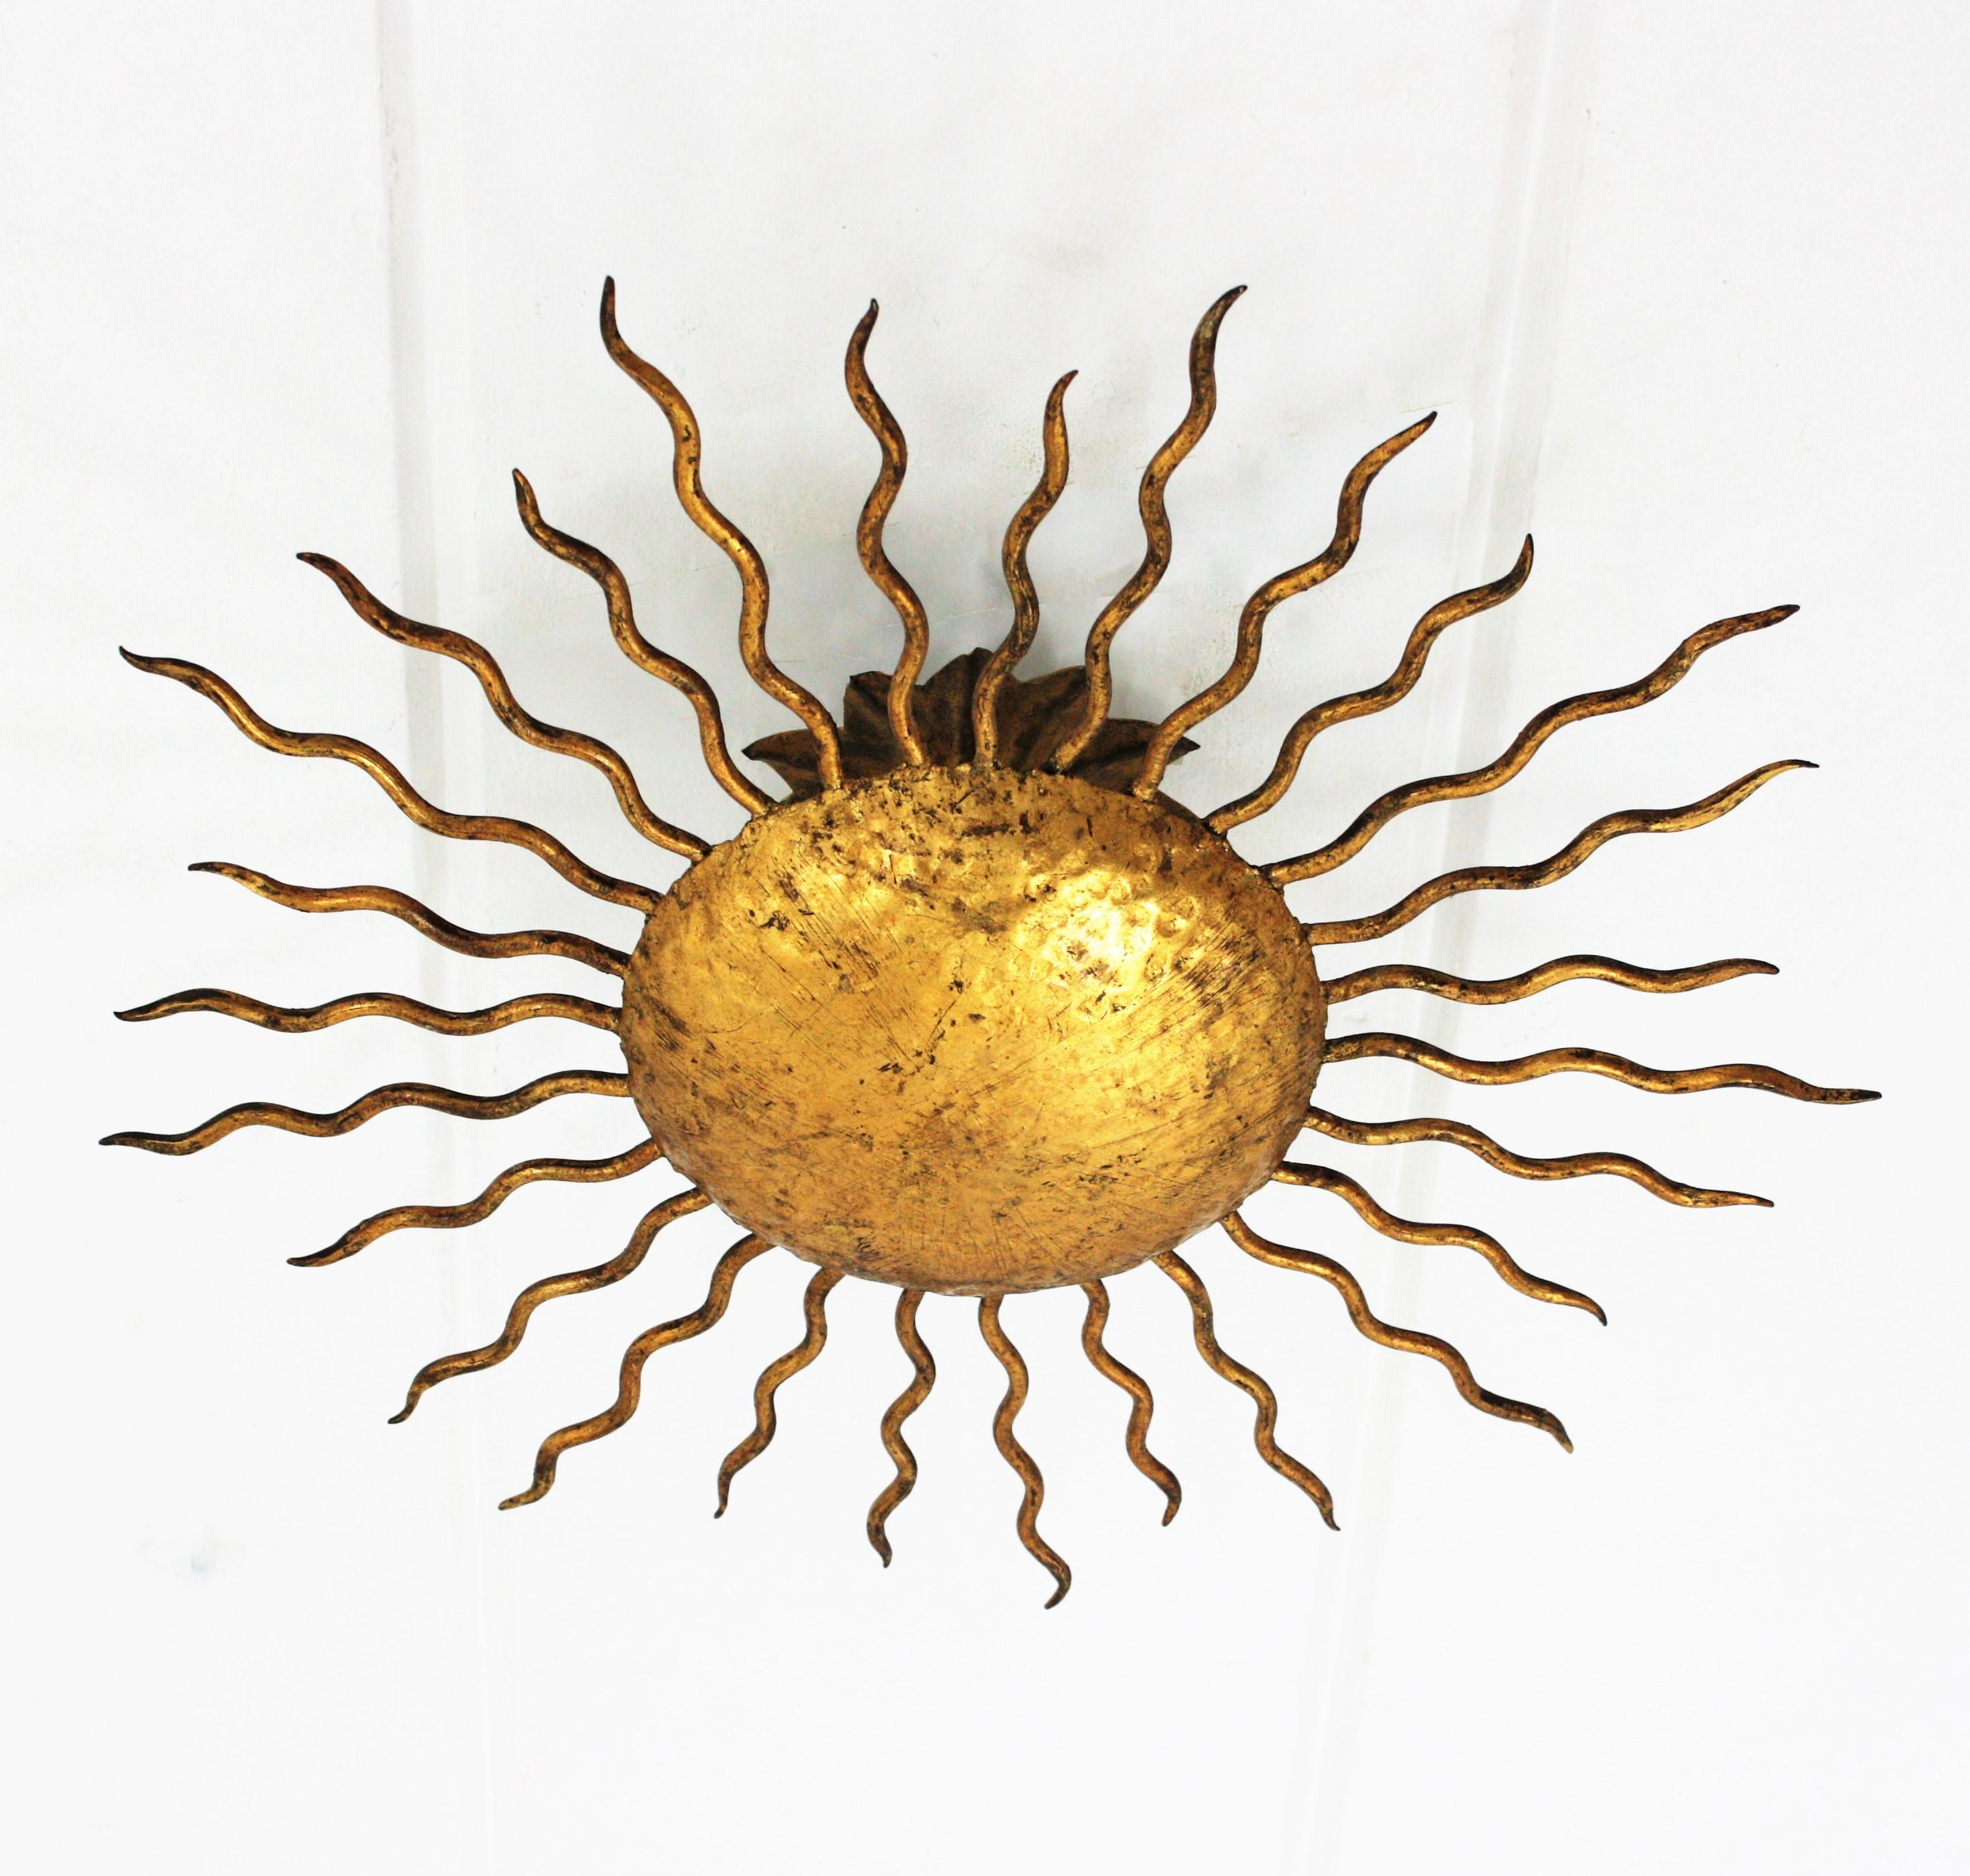 Gold leaf gilt wrought iron sunburst light fixture, Spain, 1950s.
Richly decorated in the central part with hand-hammered marks. Curly iron rays surrounding the central sphere.
Beautiful to place as ceiling light fixture but also as a wall sconce.